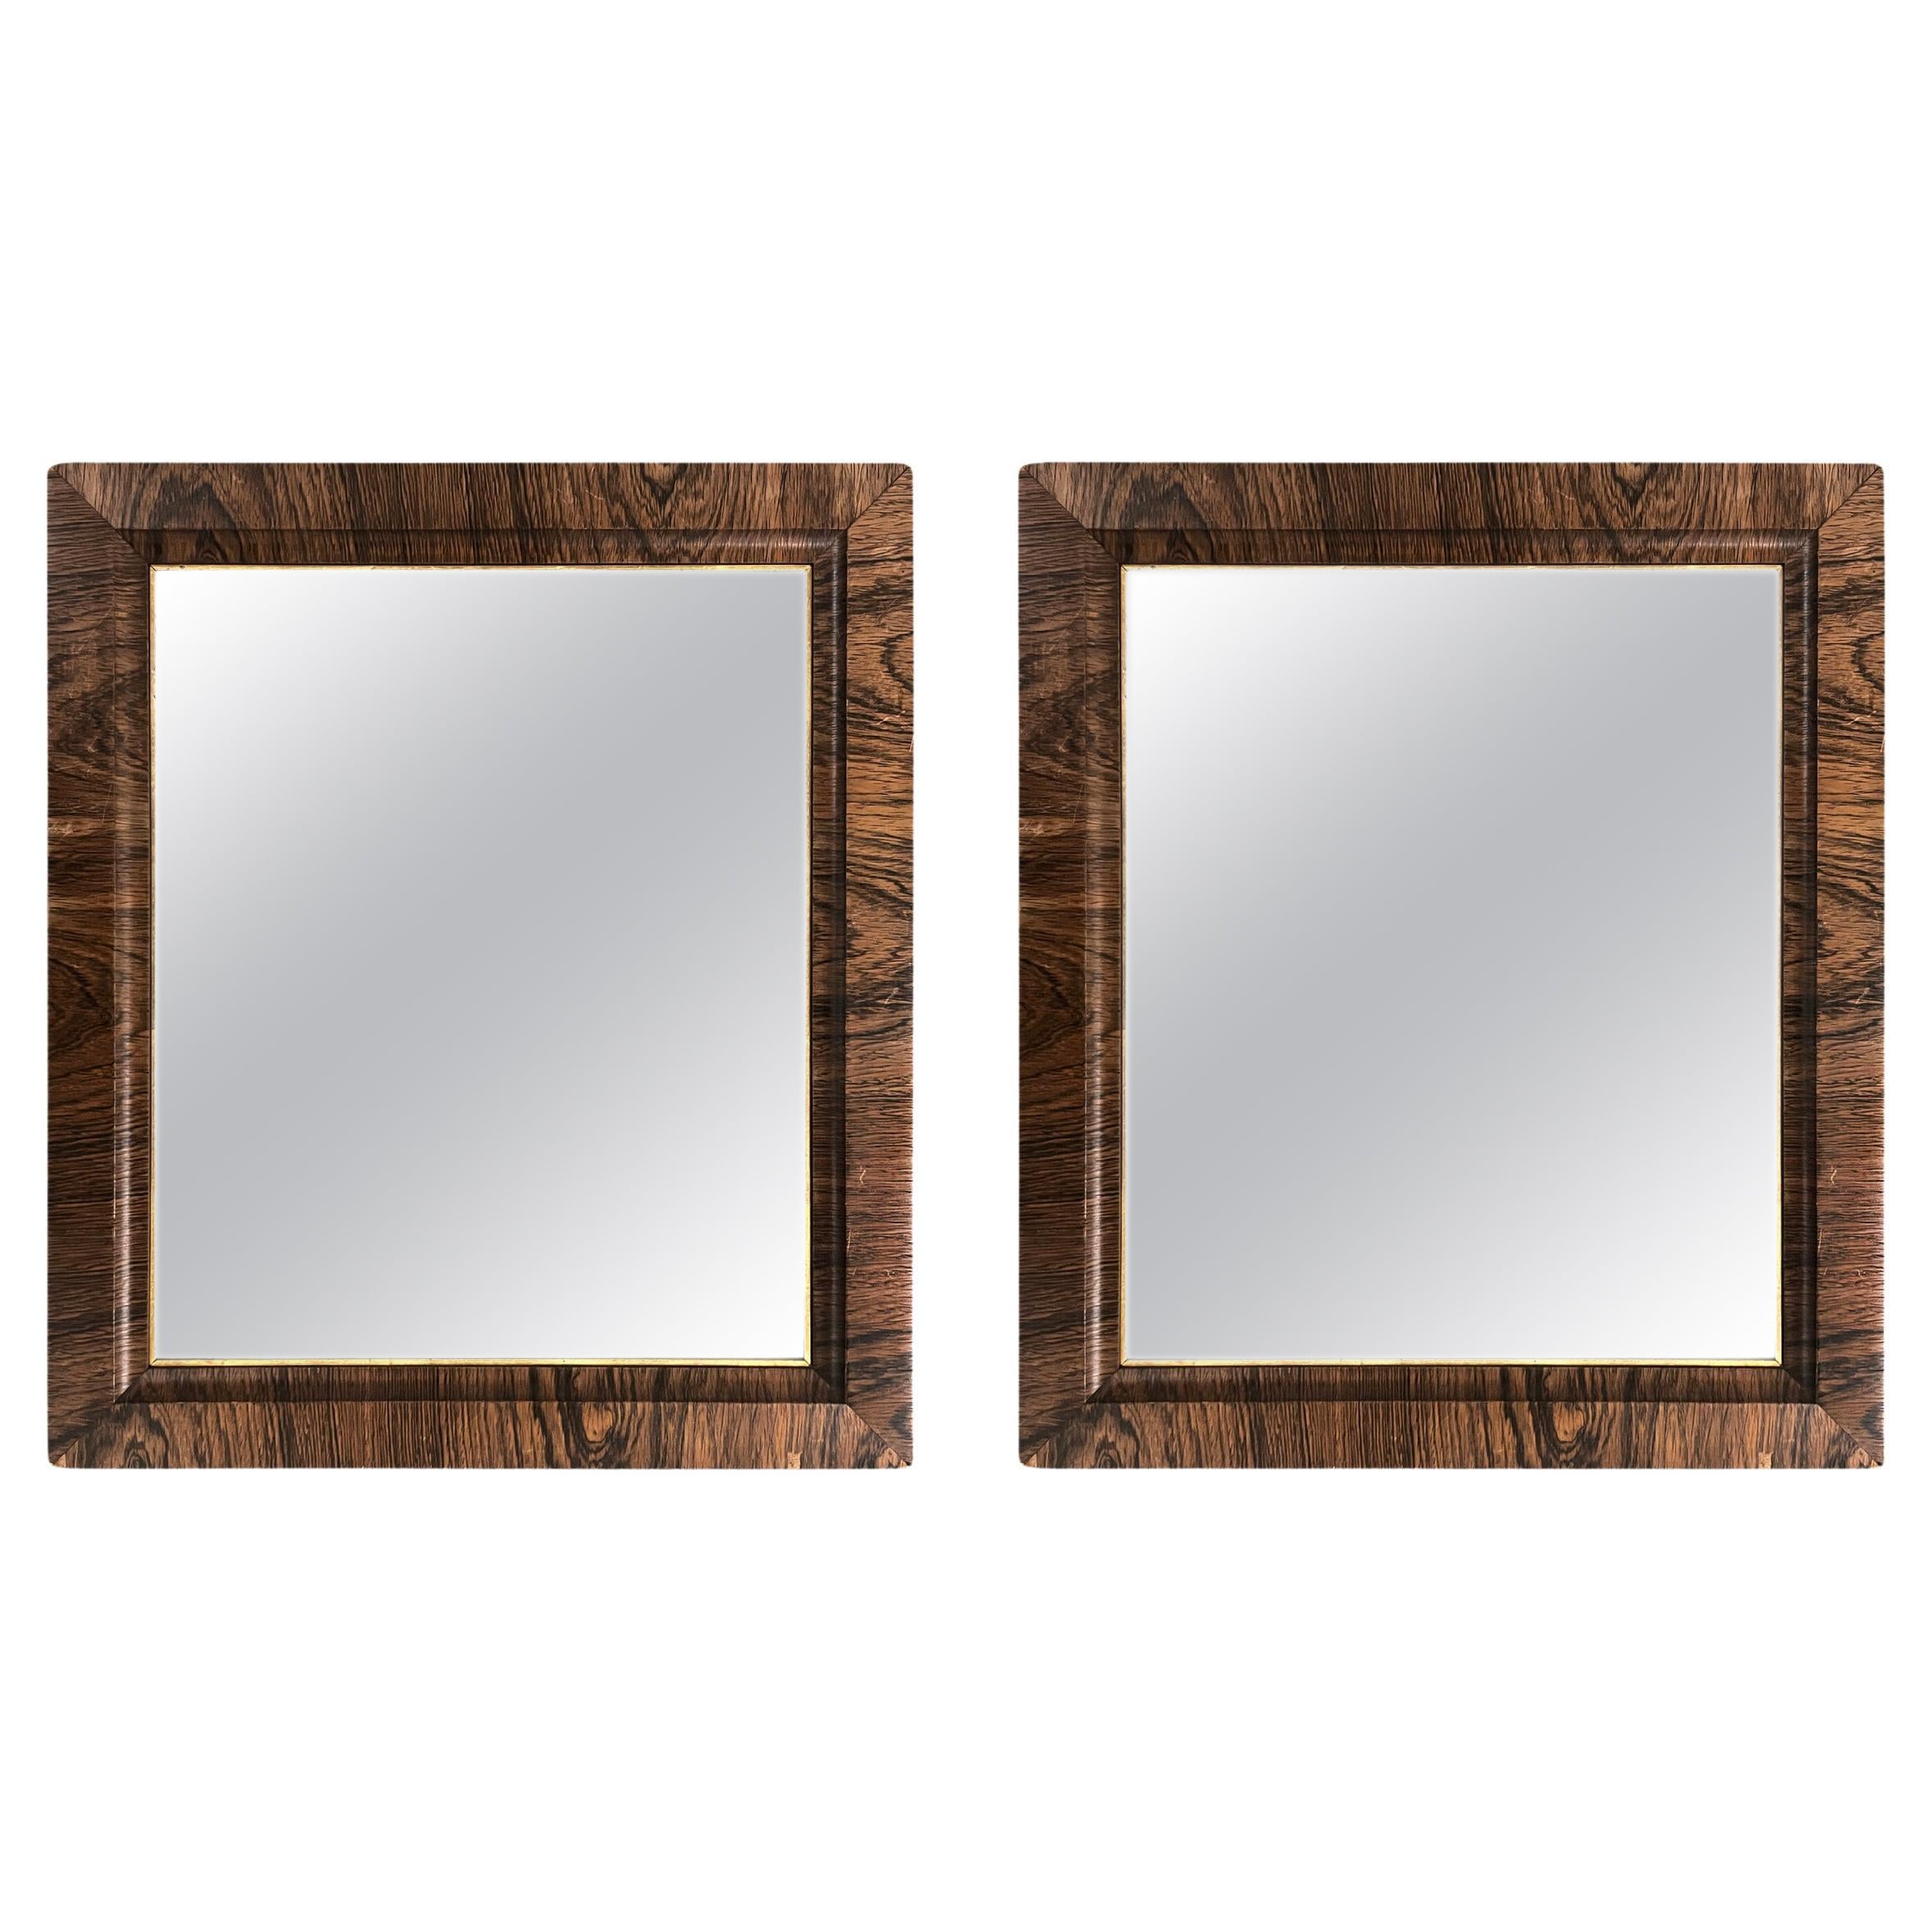 Pair of 19th Century Framed Mirrors